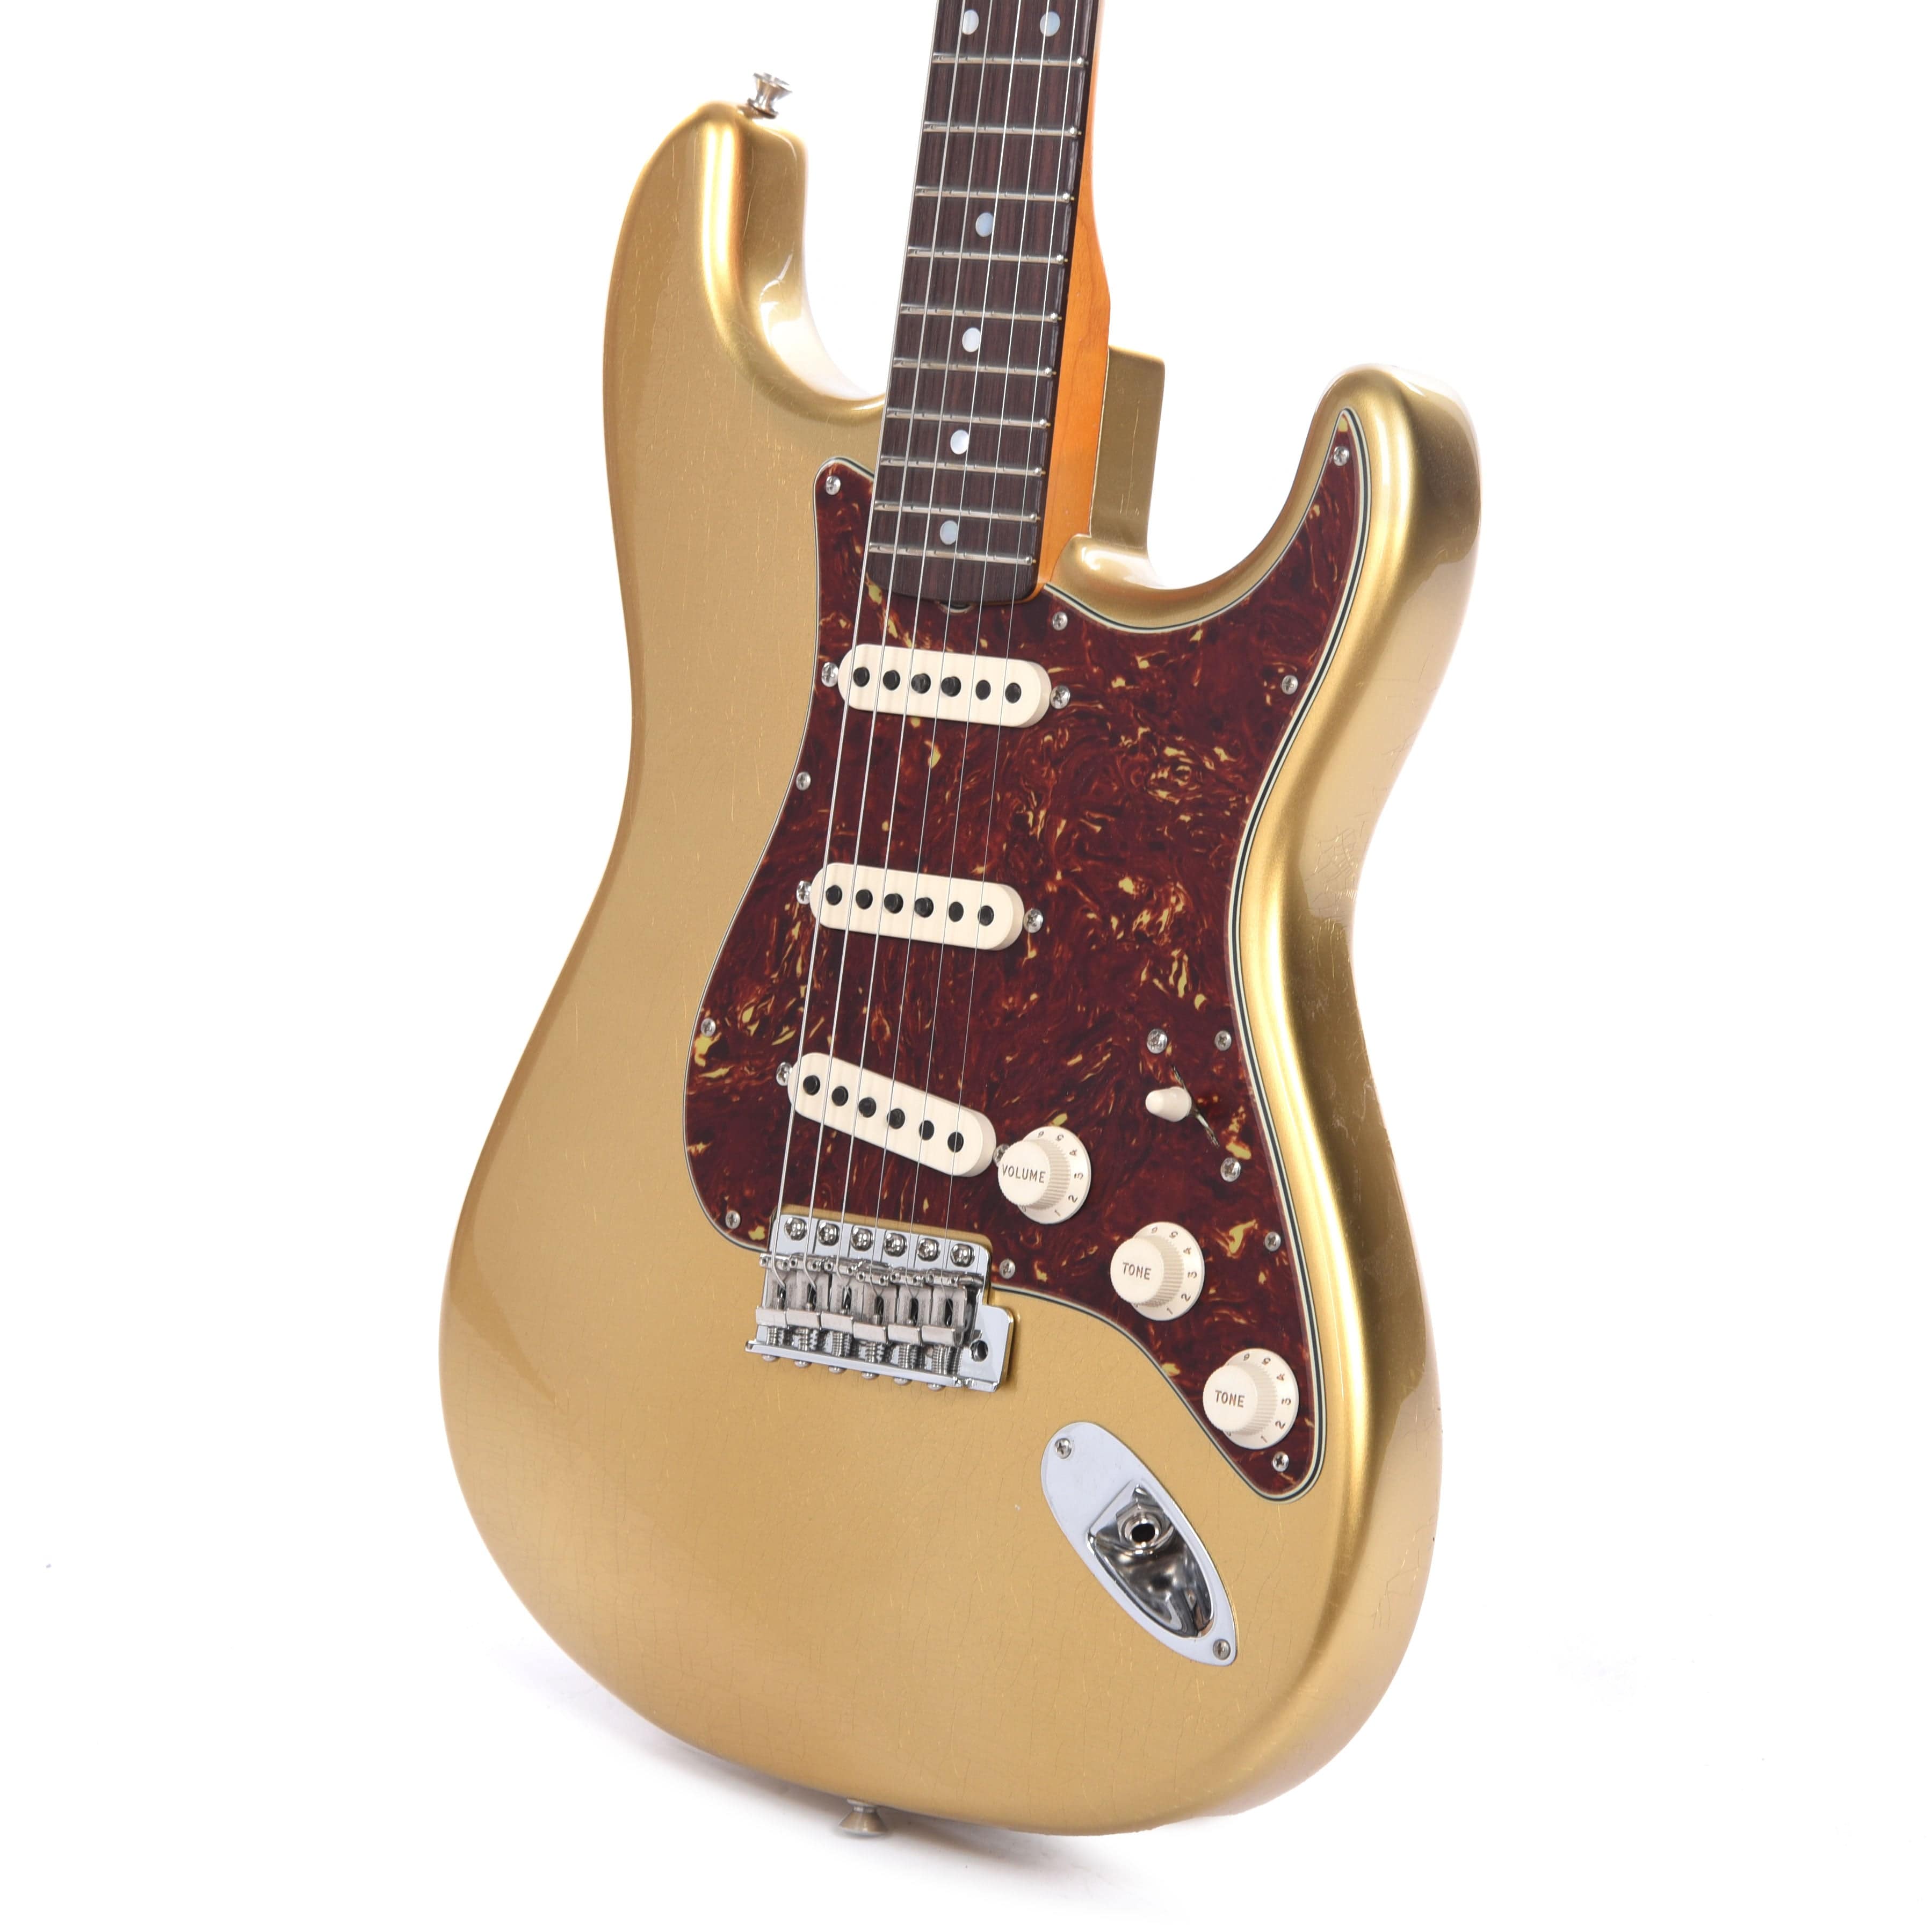 Fender Custom Shop 1963 Stratocaster Deluxe Closet Classic Aged Aztec Gold Master Built by Dennis Galuszka Electric Guitars / Solid Body